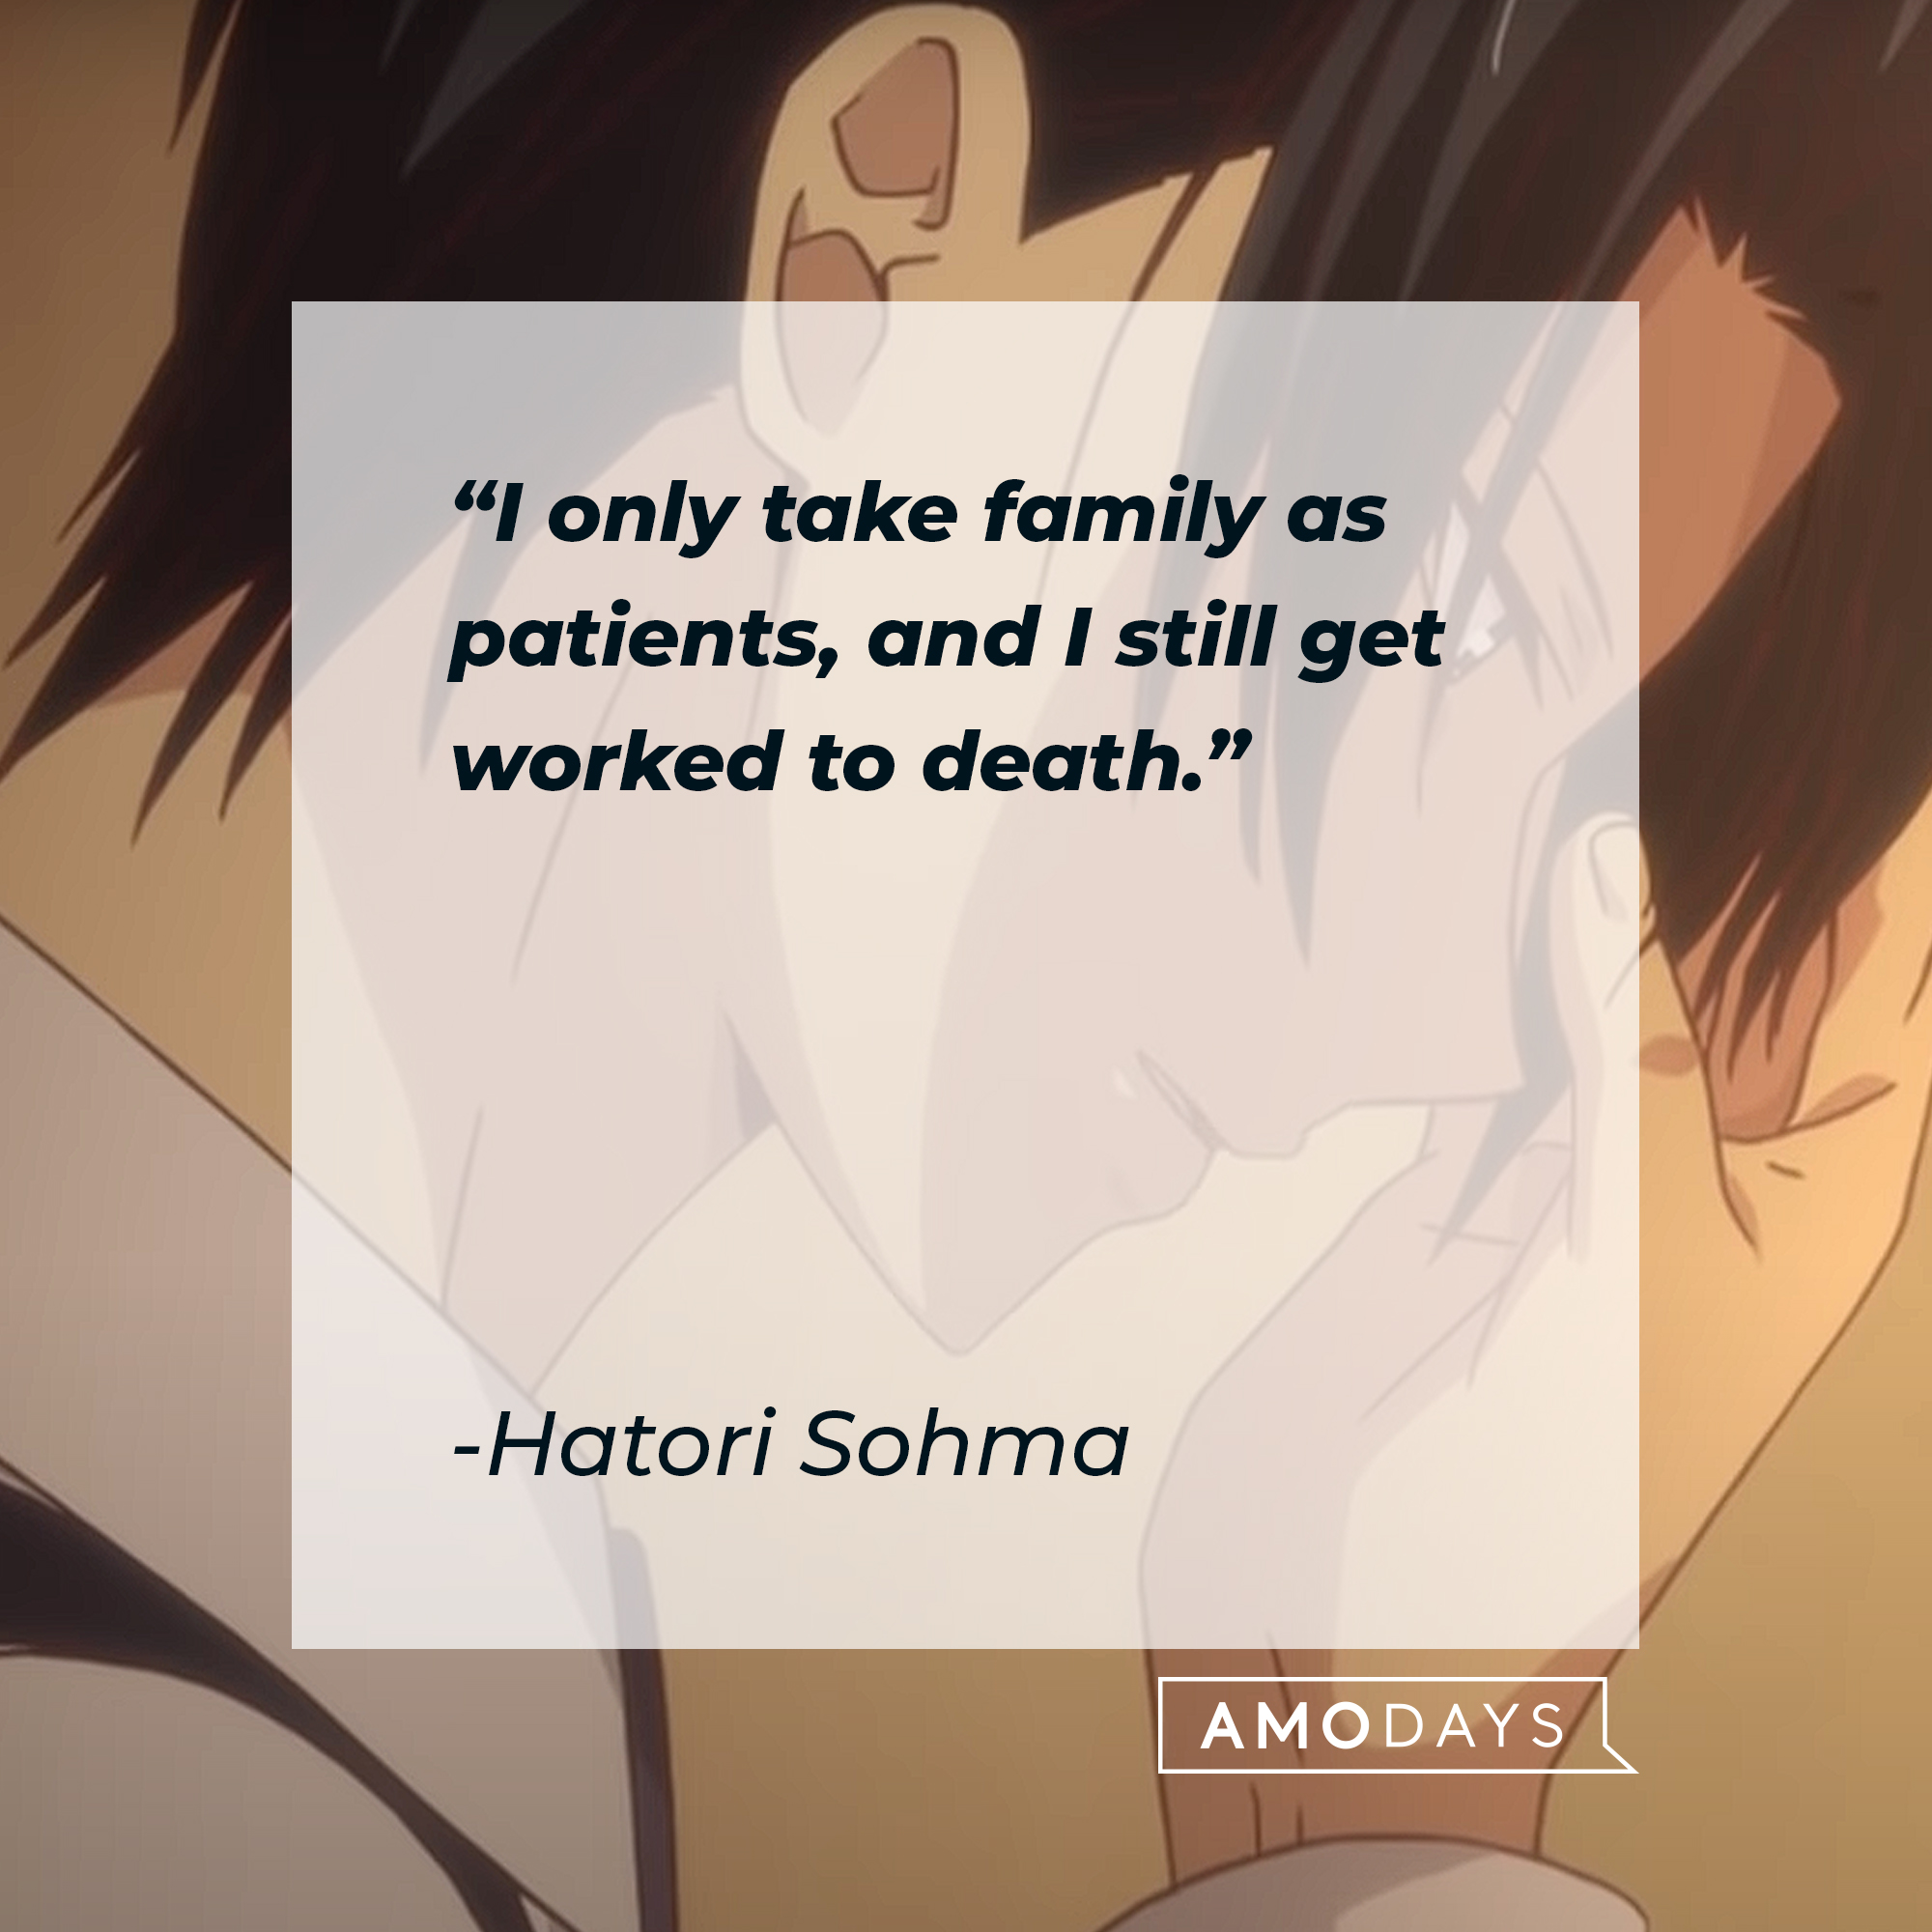 Hatori Sohma's quote: "I only take family as patients, and I still get worked to death." | Image: youtube.com/Crunchyroll Collection